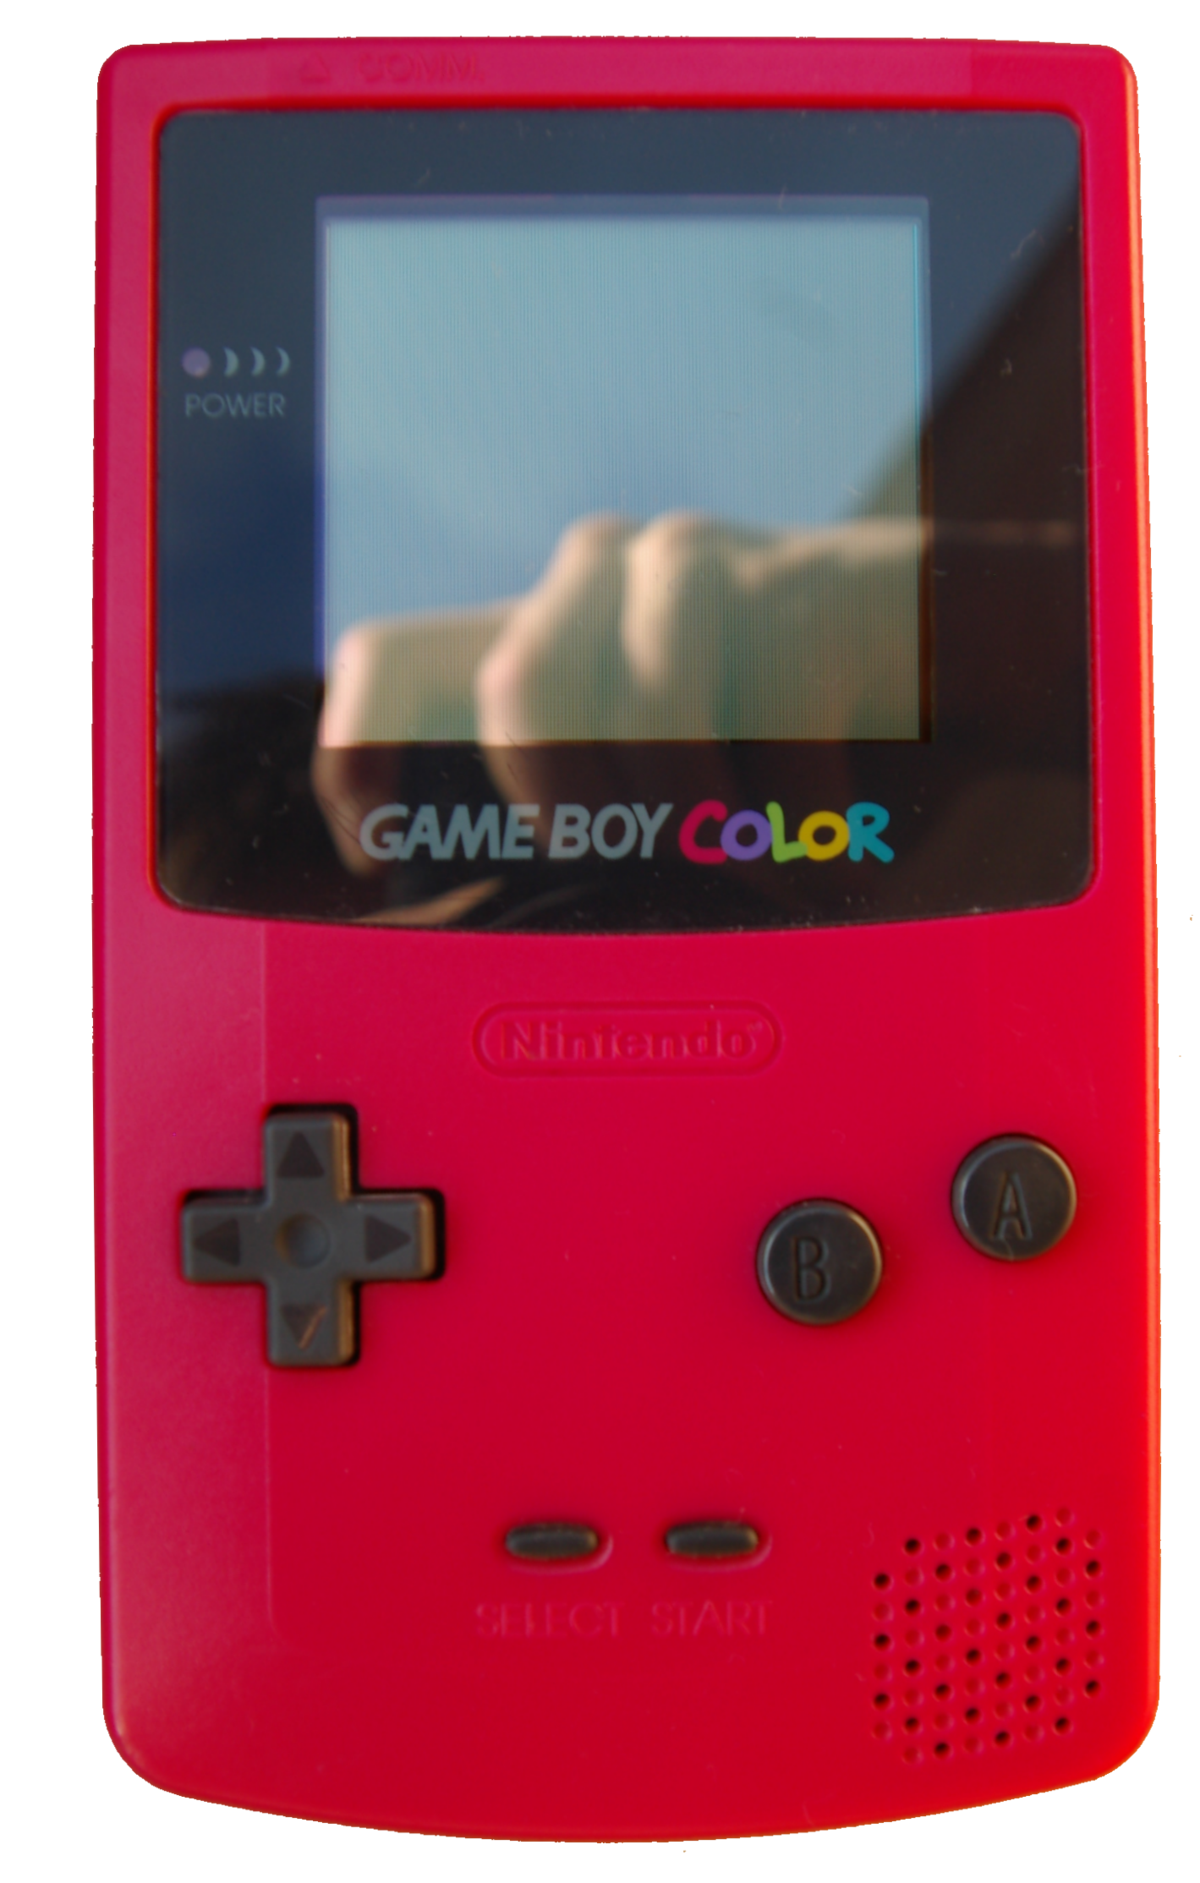 https://upload.wikimedia.org/wikipedia/commons/thumb/d/d1/Game_Boy_Color.png/1200px-Game_Boy_Color.png